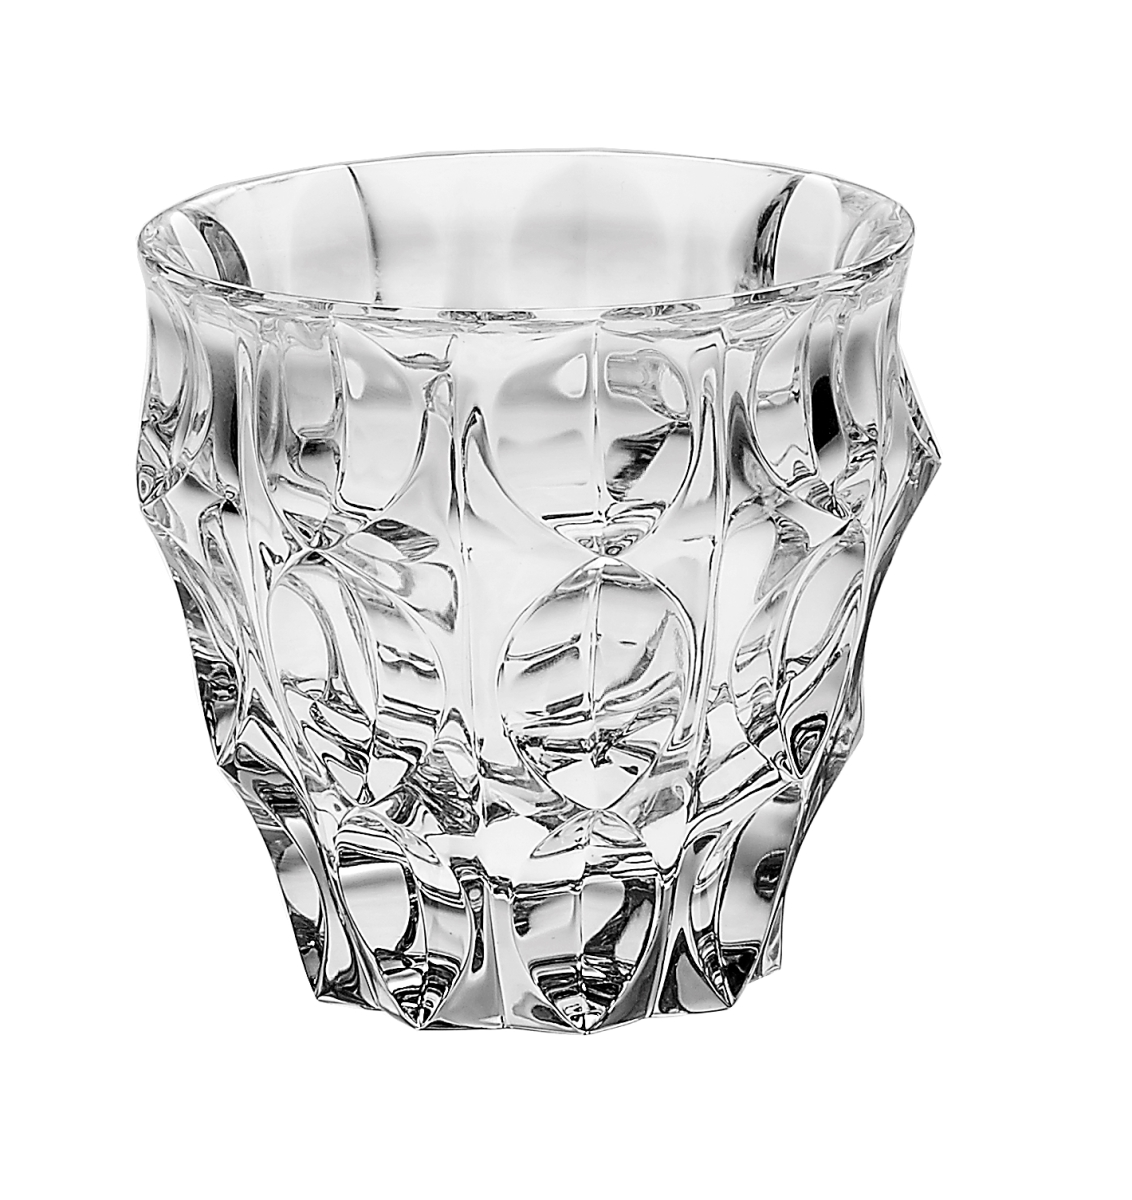    Fortune 1  700  6  290   Fortune  Crystal BOHEMIA  bph787